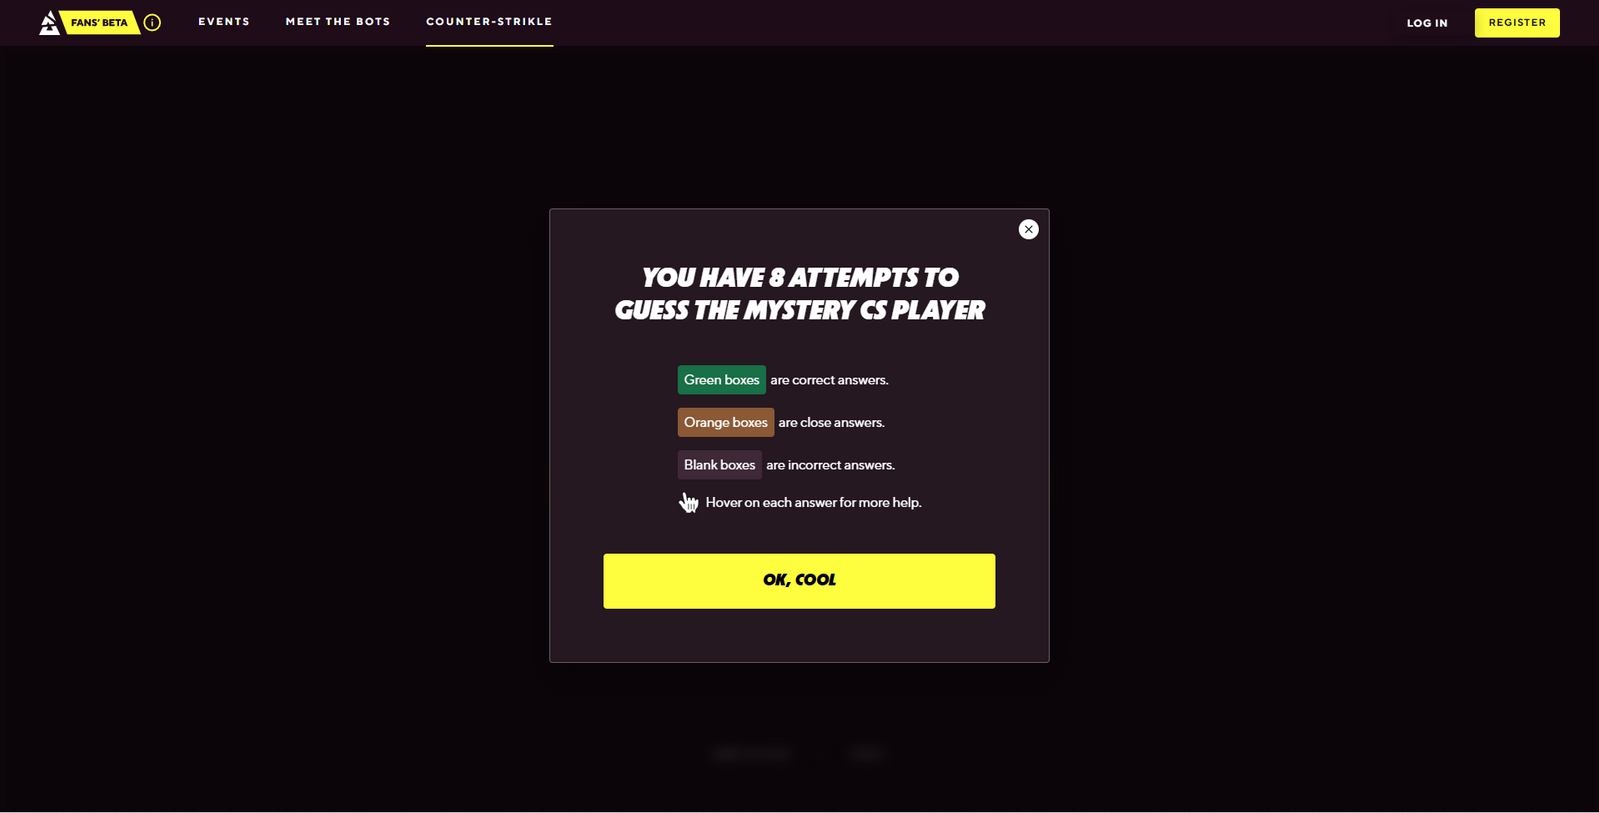 The landing page for Counter-Strikle